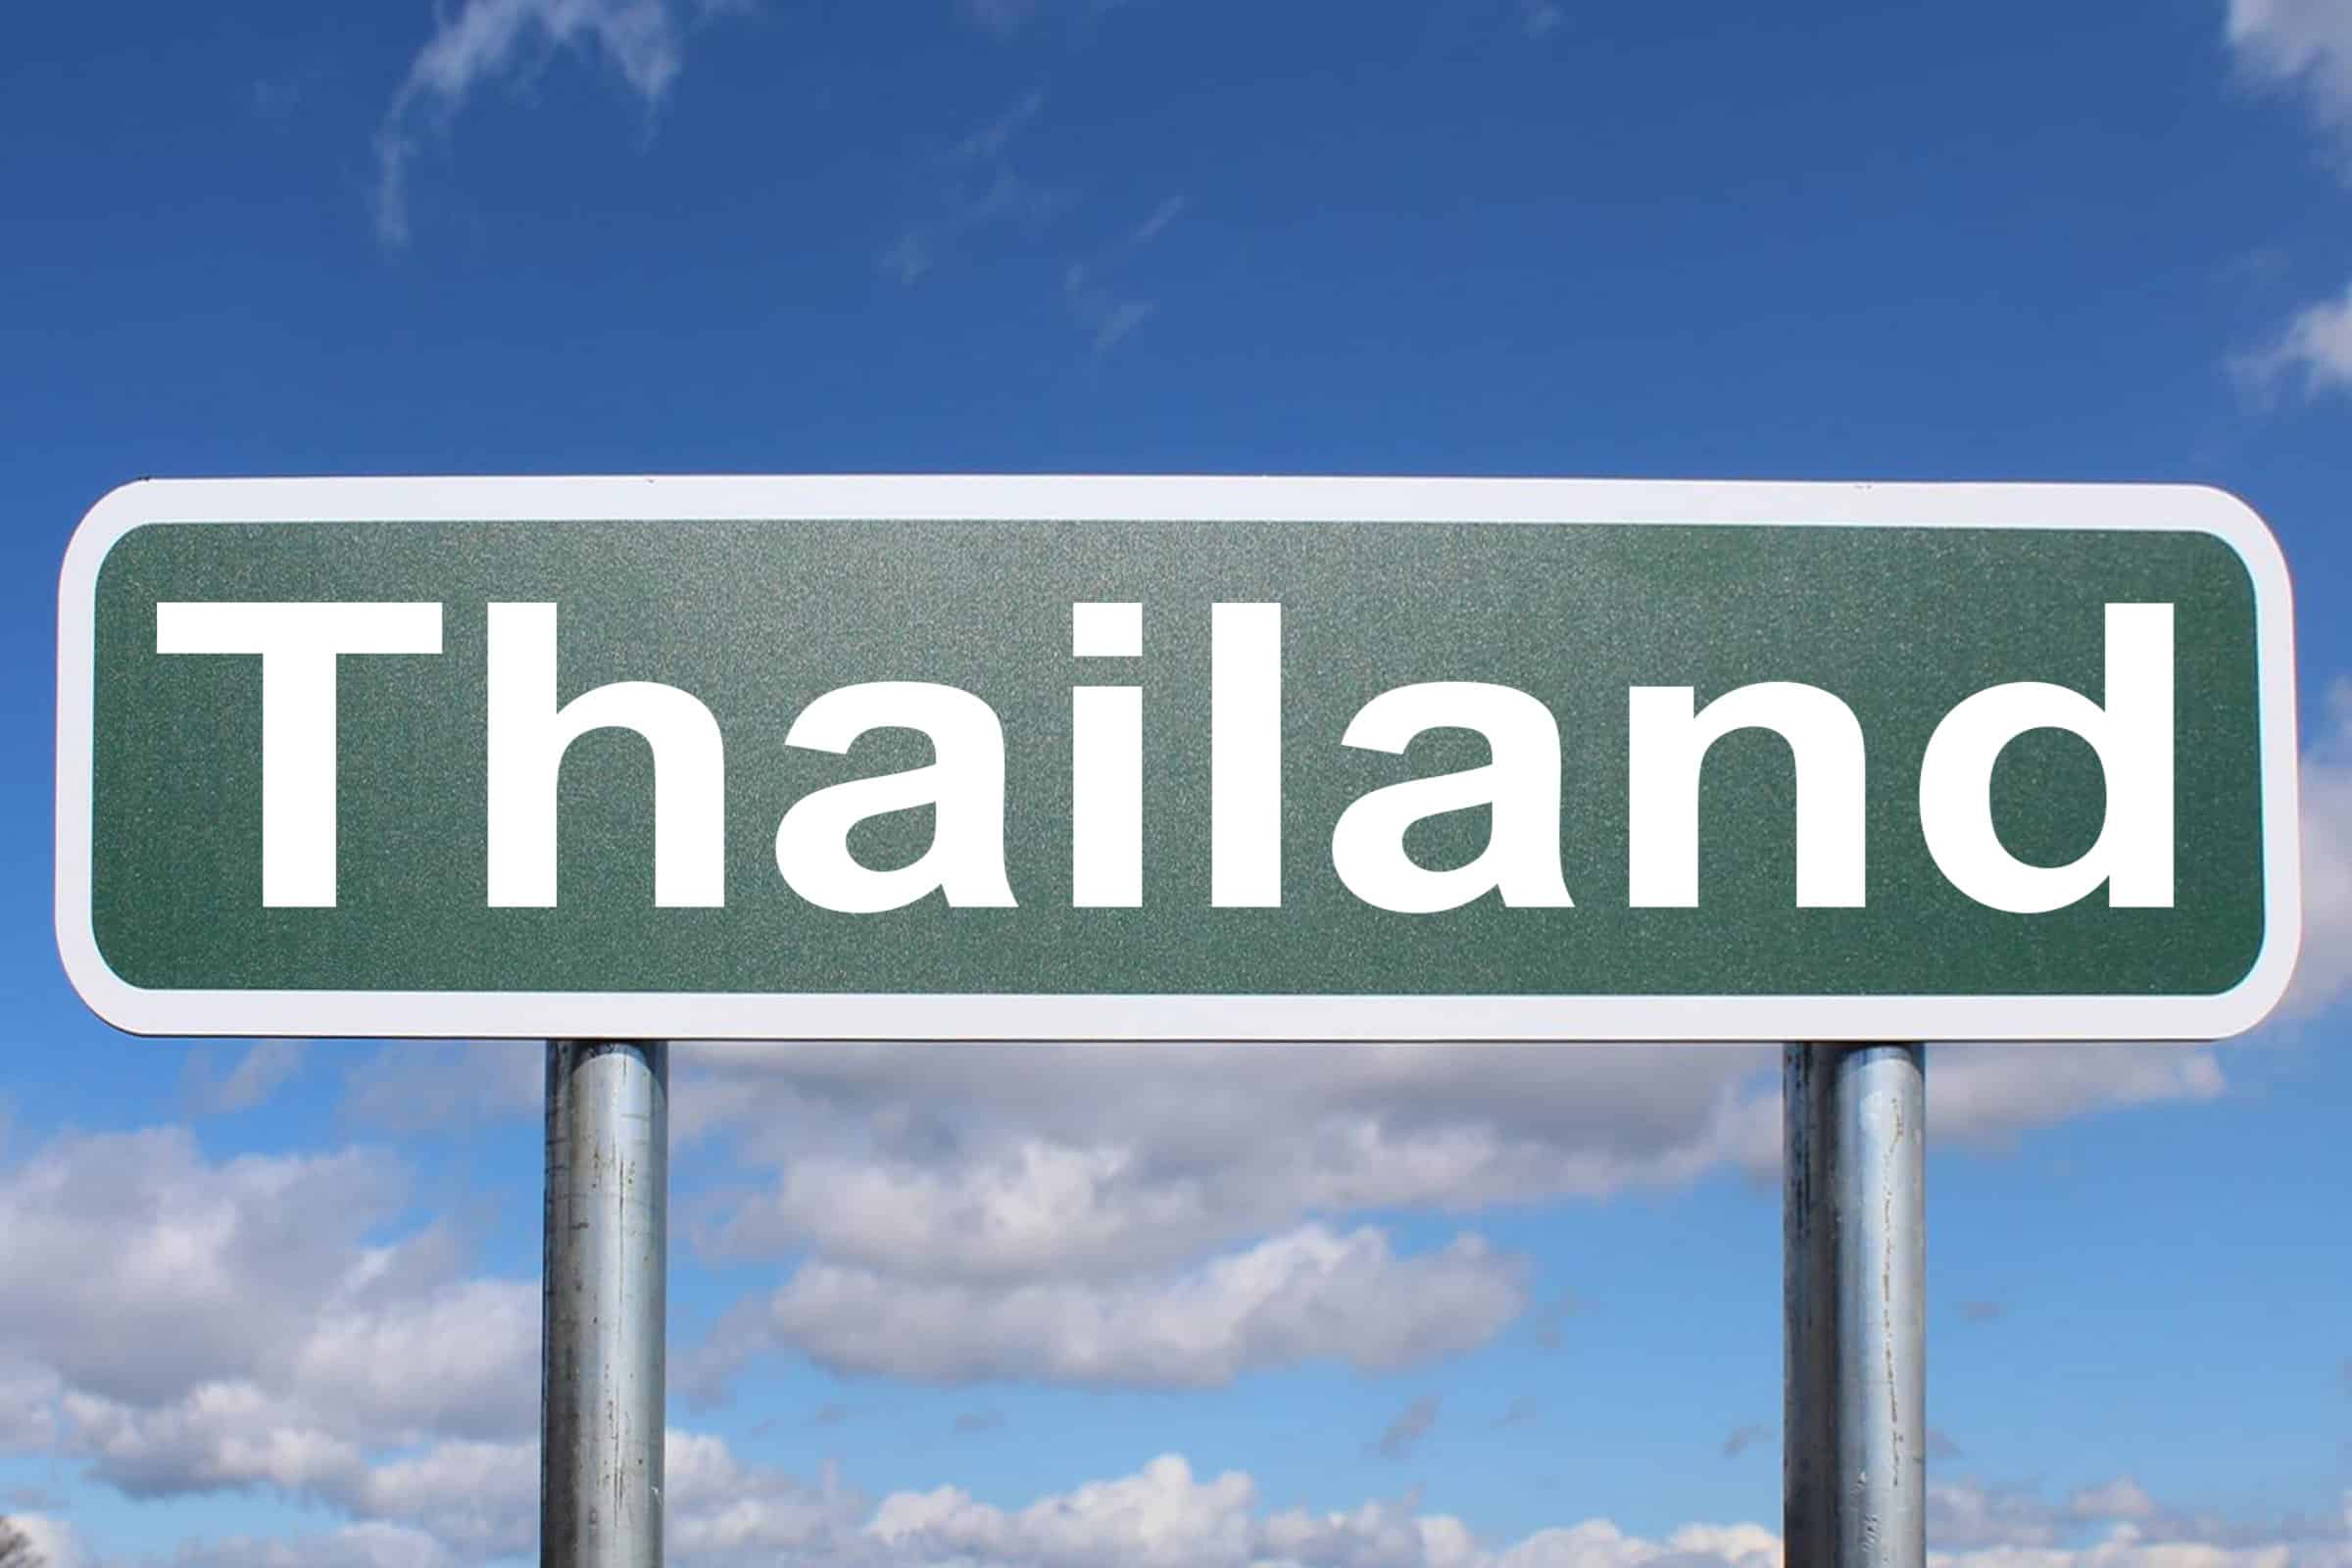 What’s new in Thailand?